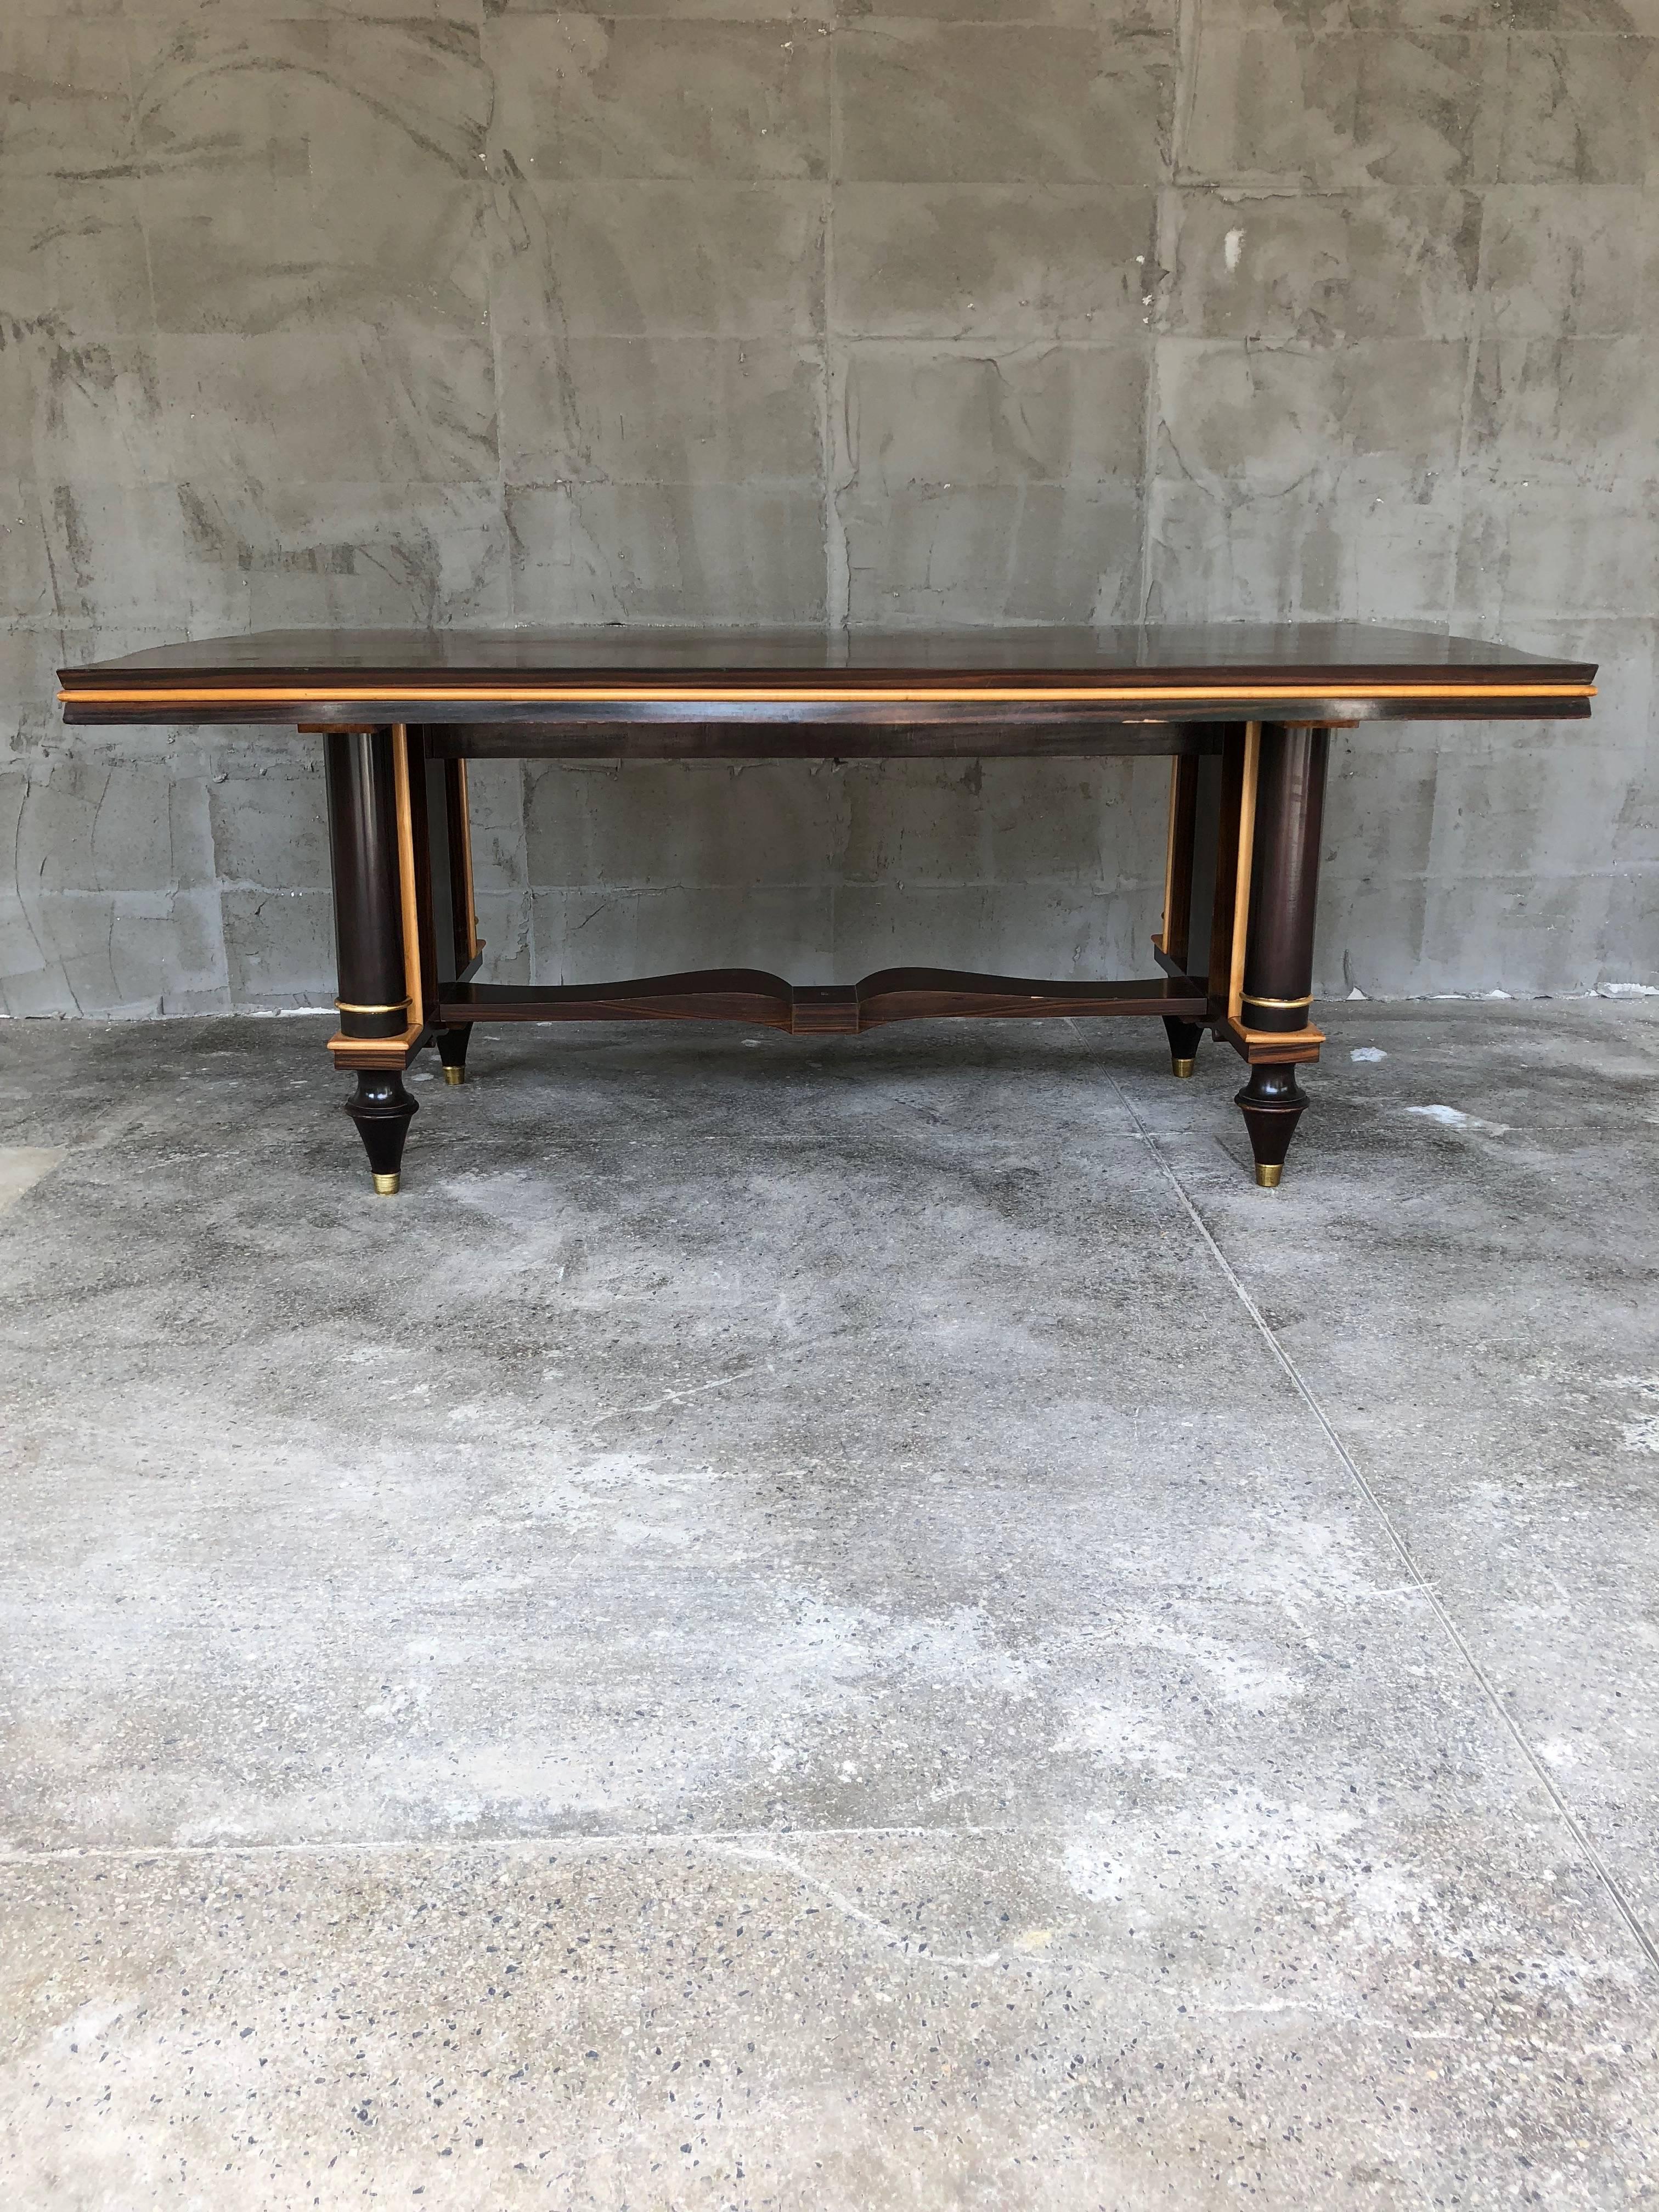 Exceptional and very rare as design French Art Deco dining table. Macassar ebony wood for the external surfaces. Produced in the period of the 1940s in France. The table was set up with same Macassar ebony sideboard. The table is partially restored